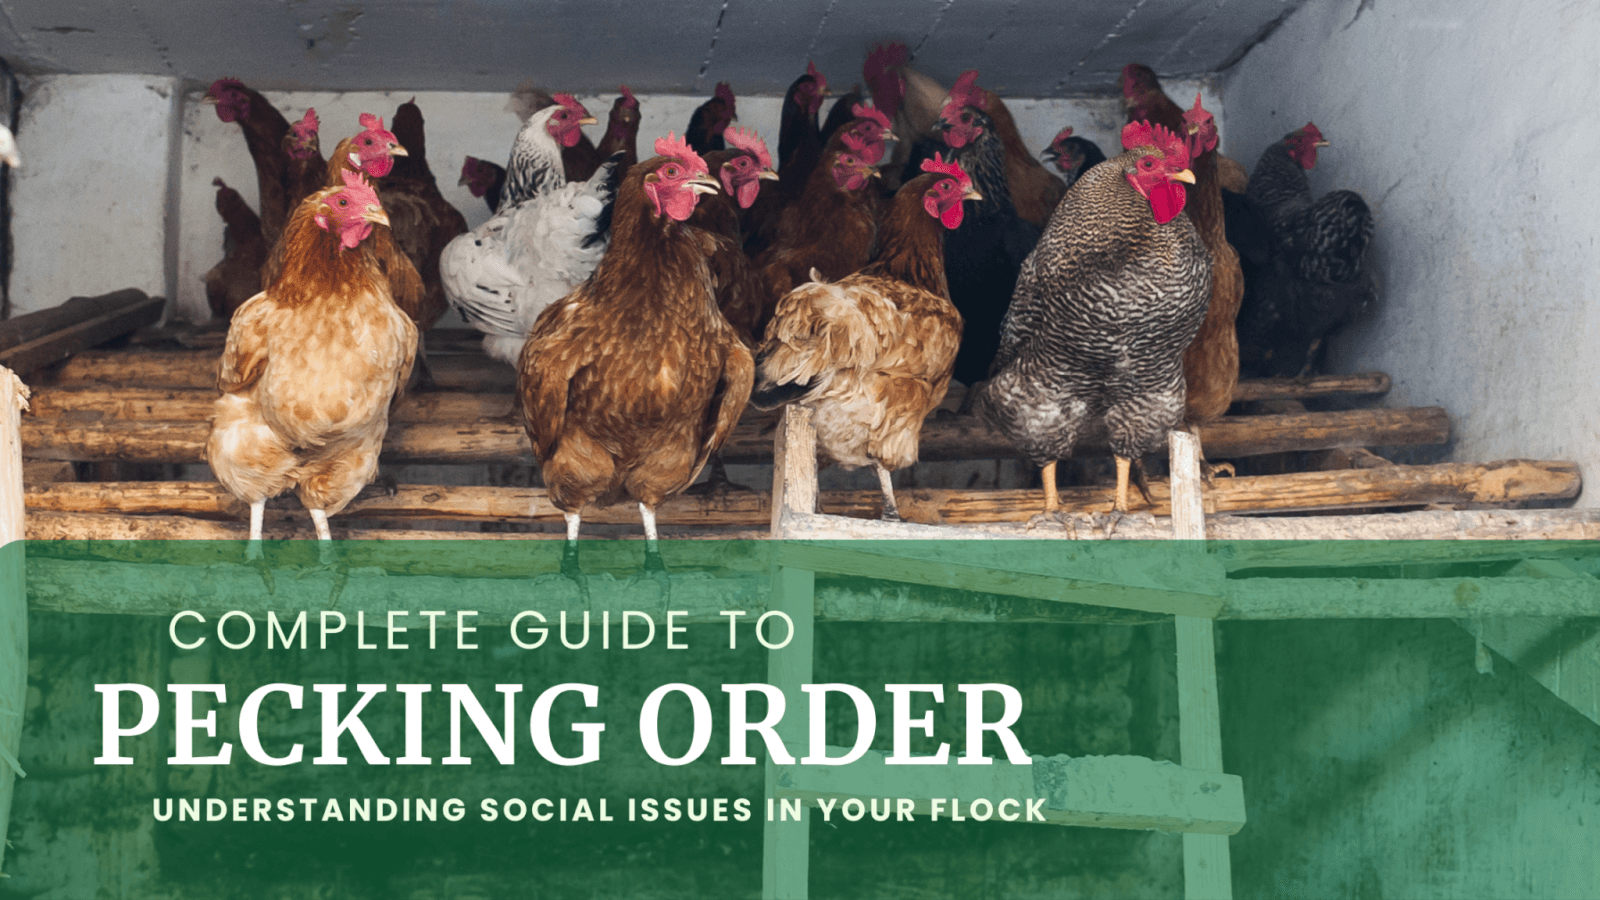 Text: Complete Guide to Pecking Order: Understanding Your Flock's Social Issues. Image: Roosting Hens